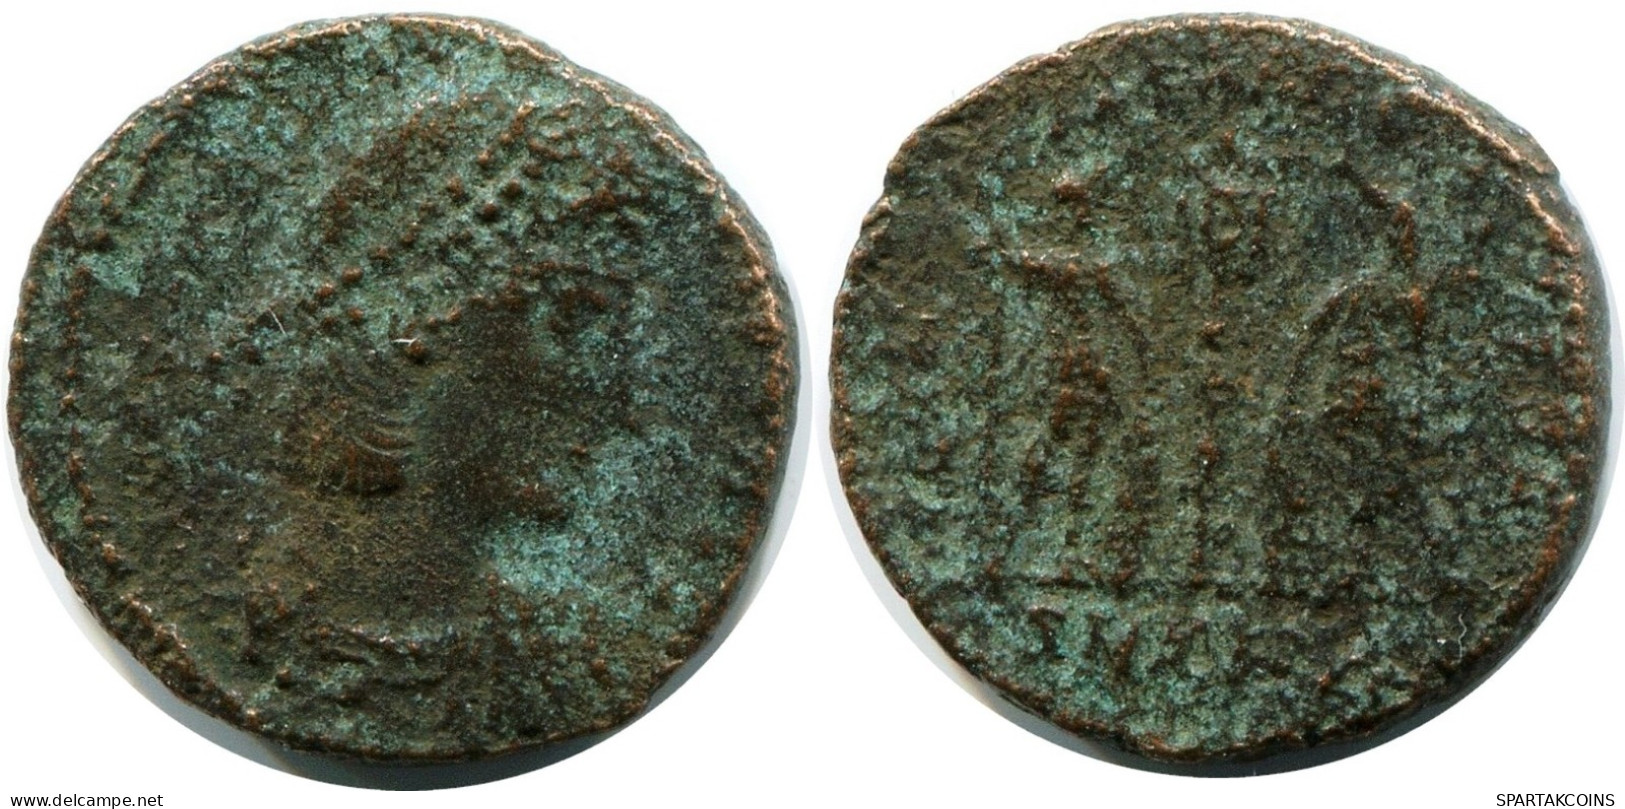 ROMAN Pièce MINTED IN ANTIOCH FROM THE ROYAL ONTARIO MUSEUM #ANC11279.14.F.A - The Christian Empire (307 AD Tot 363 AD)